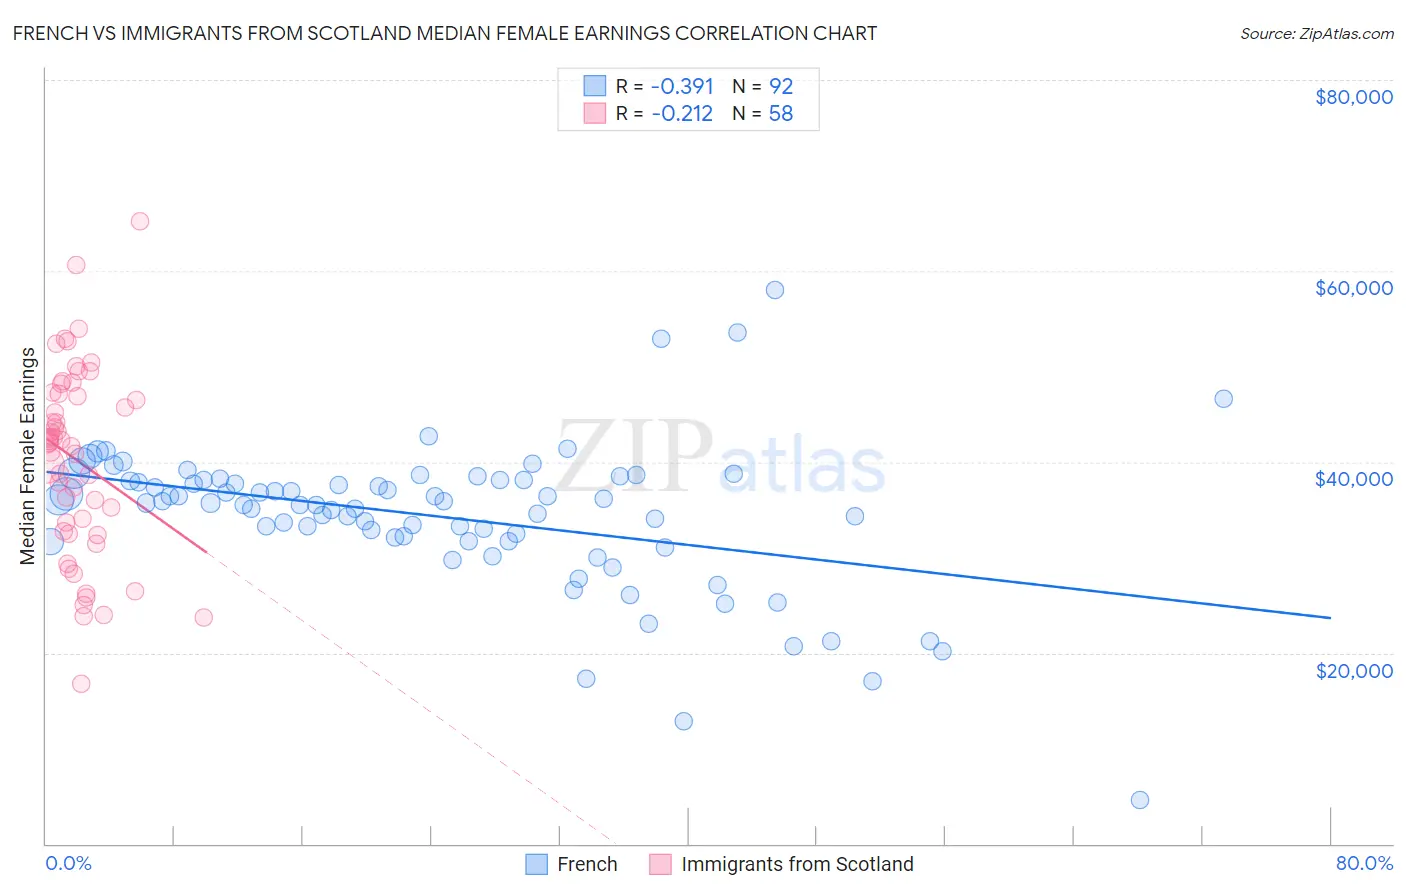 French vs Immigrants from Scotland Median Female Earnings